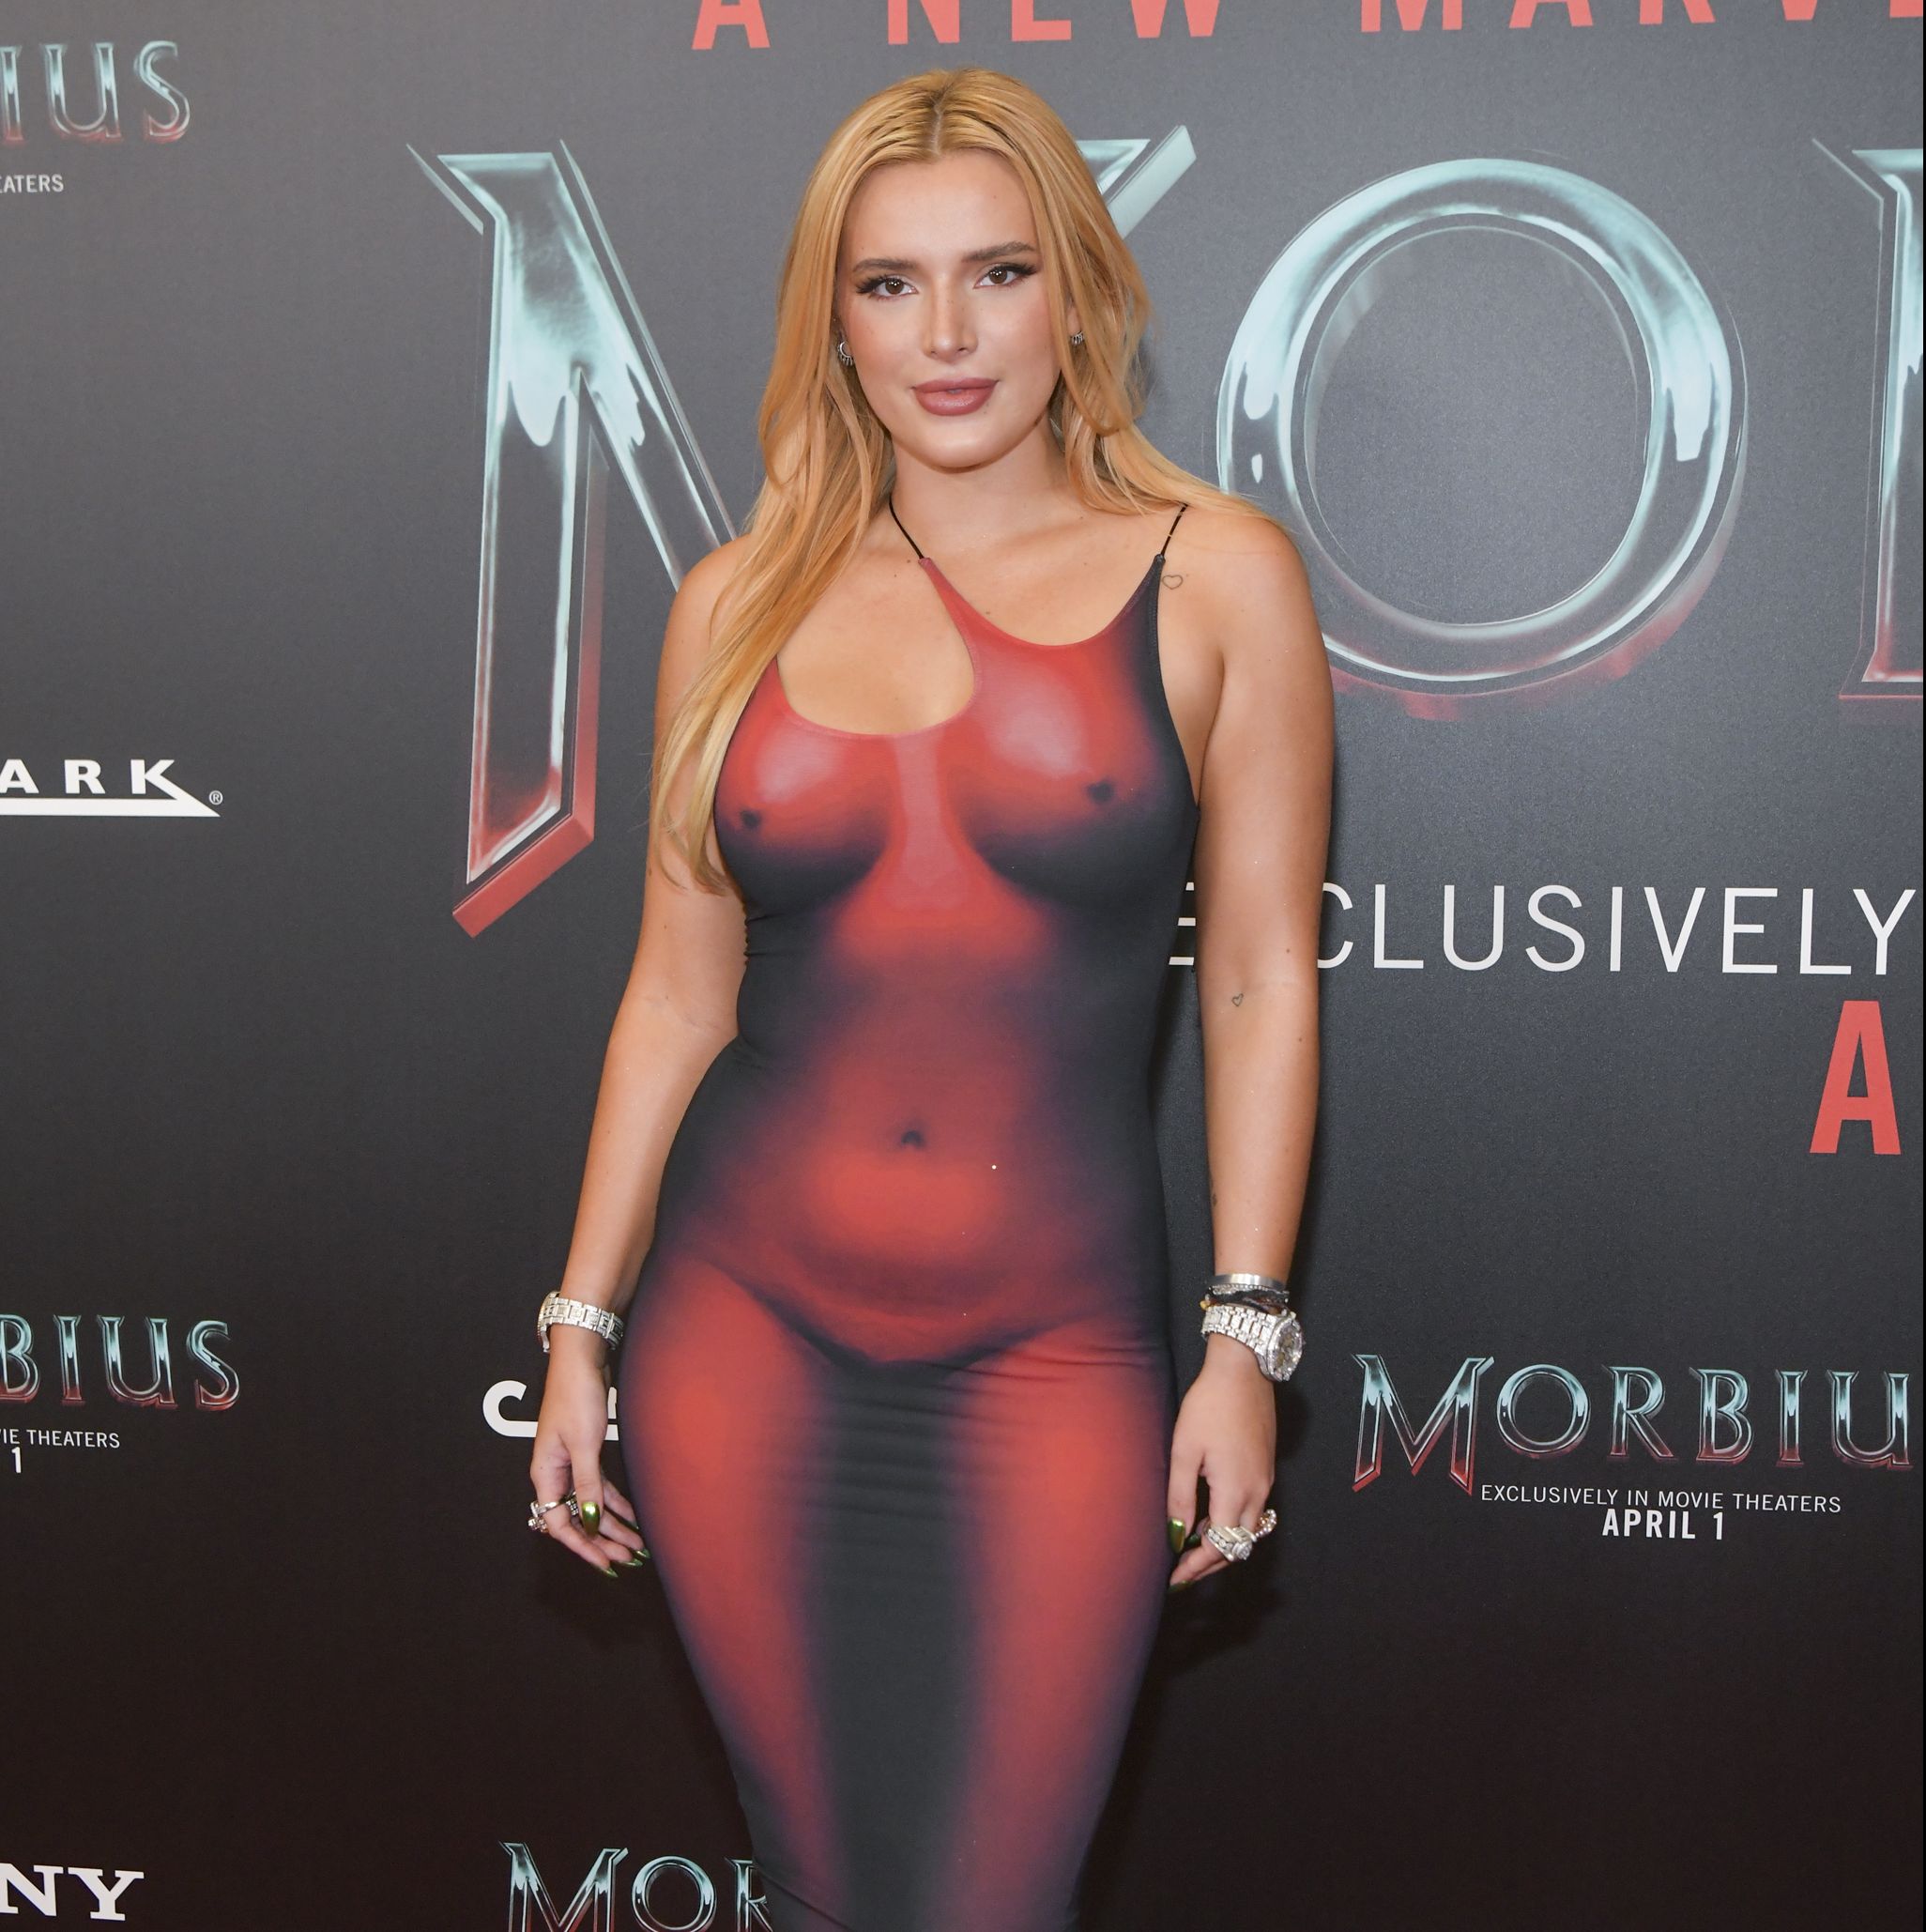 Bella Thorne Stepped Out in a Optical Illusion Dress Designed to Make Her Look Fully Naked